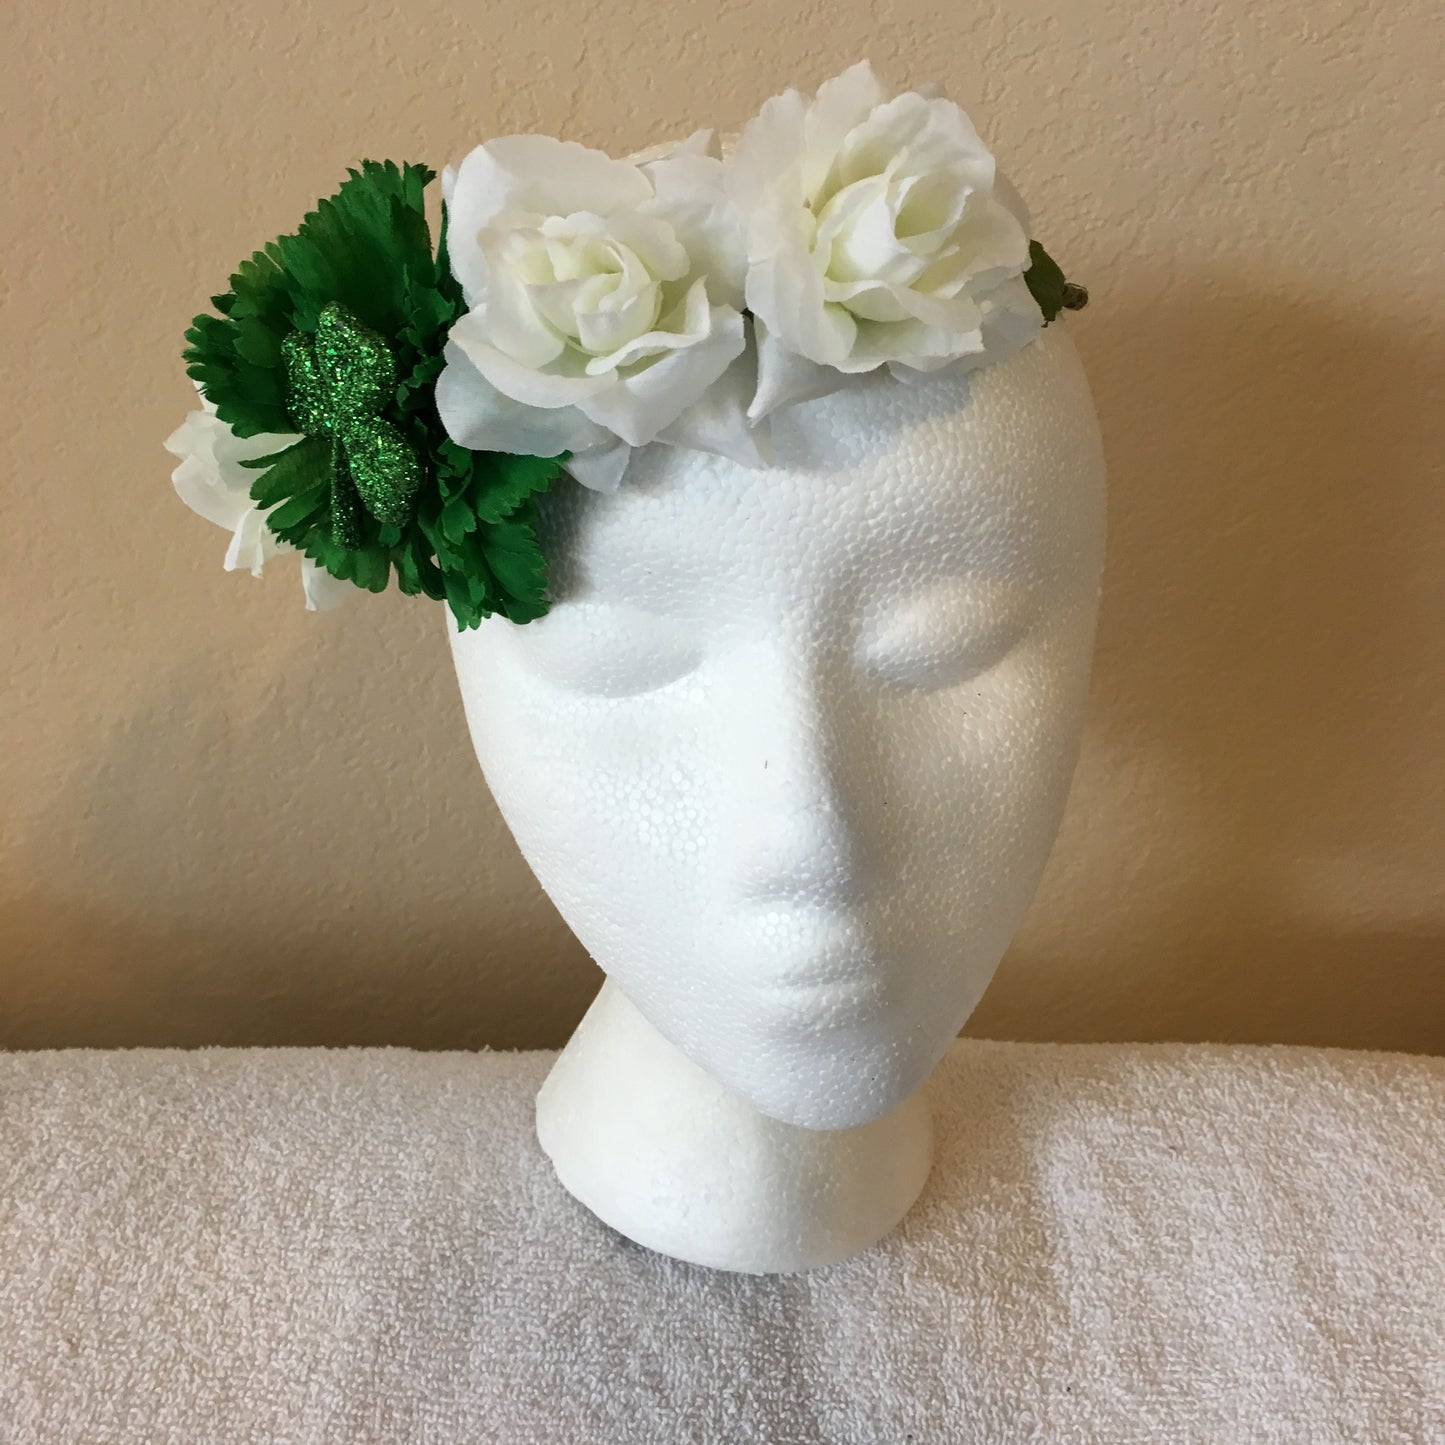 Show Special Side Wreath - One green carnations w/ three white roses w/ one shamrock accent